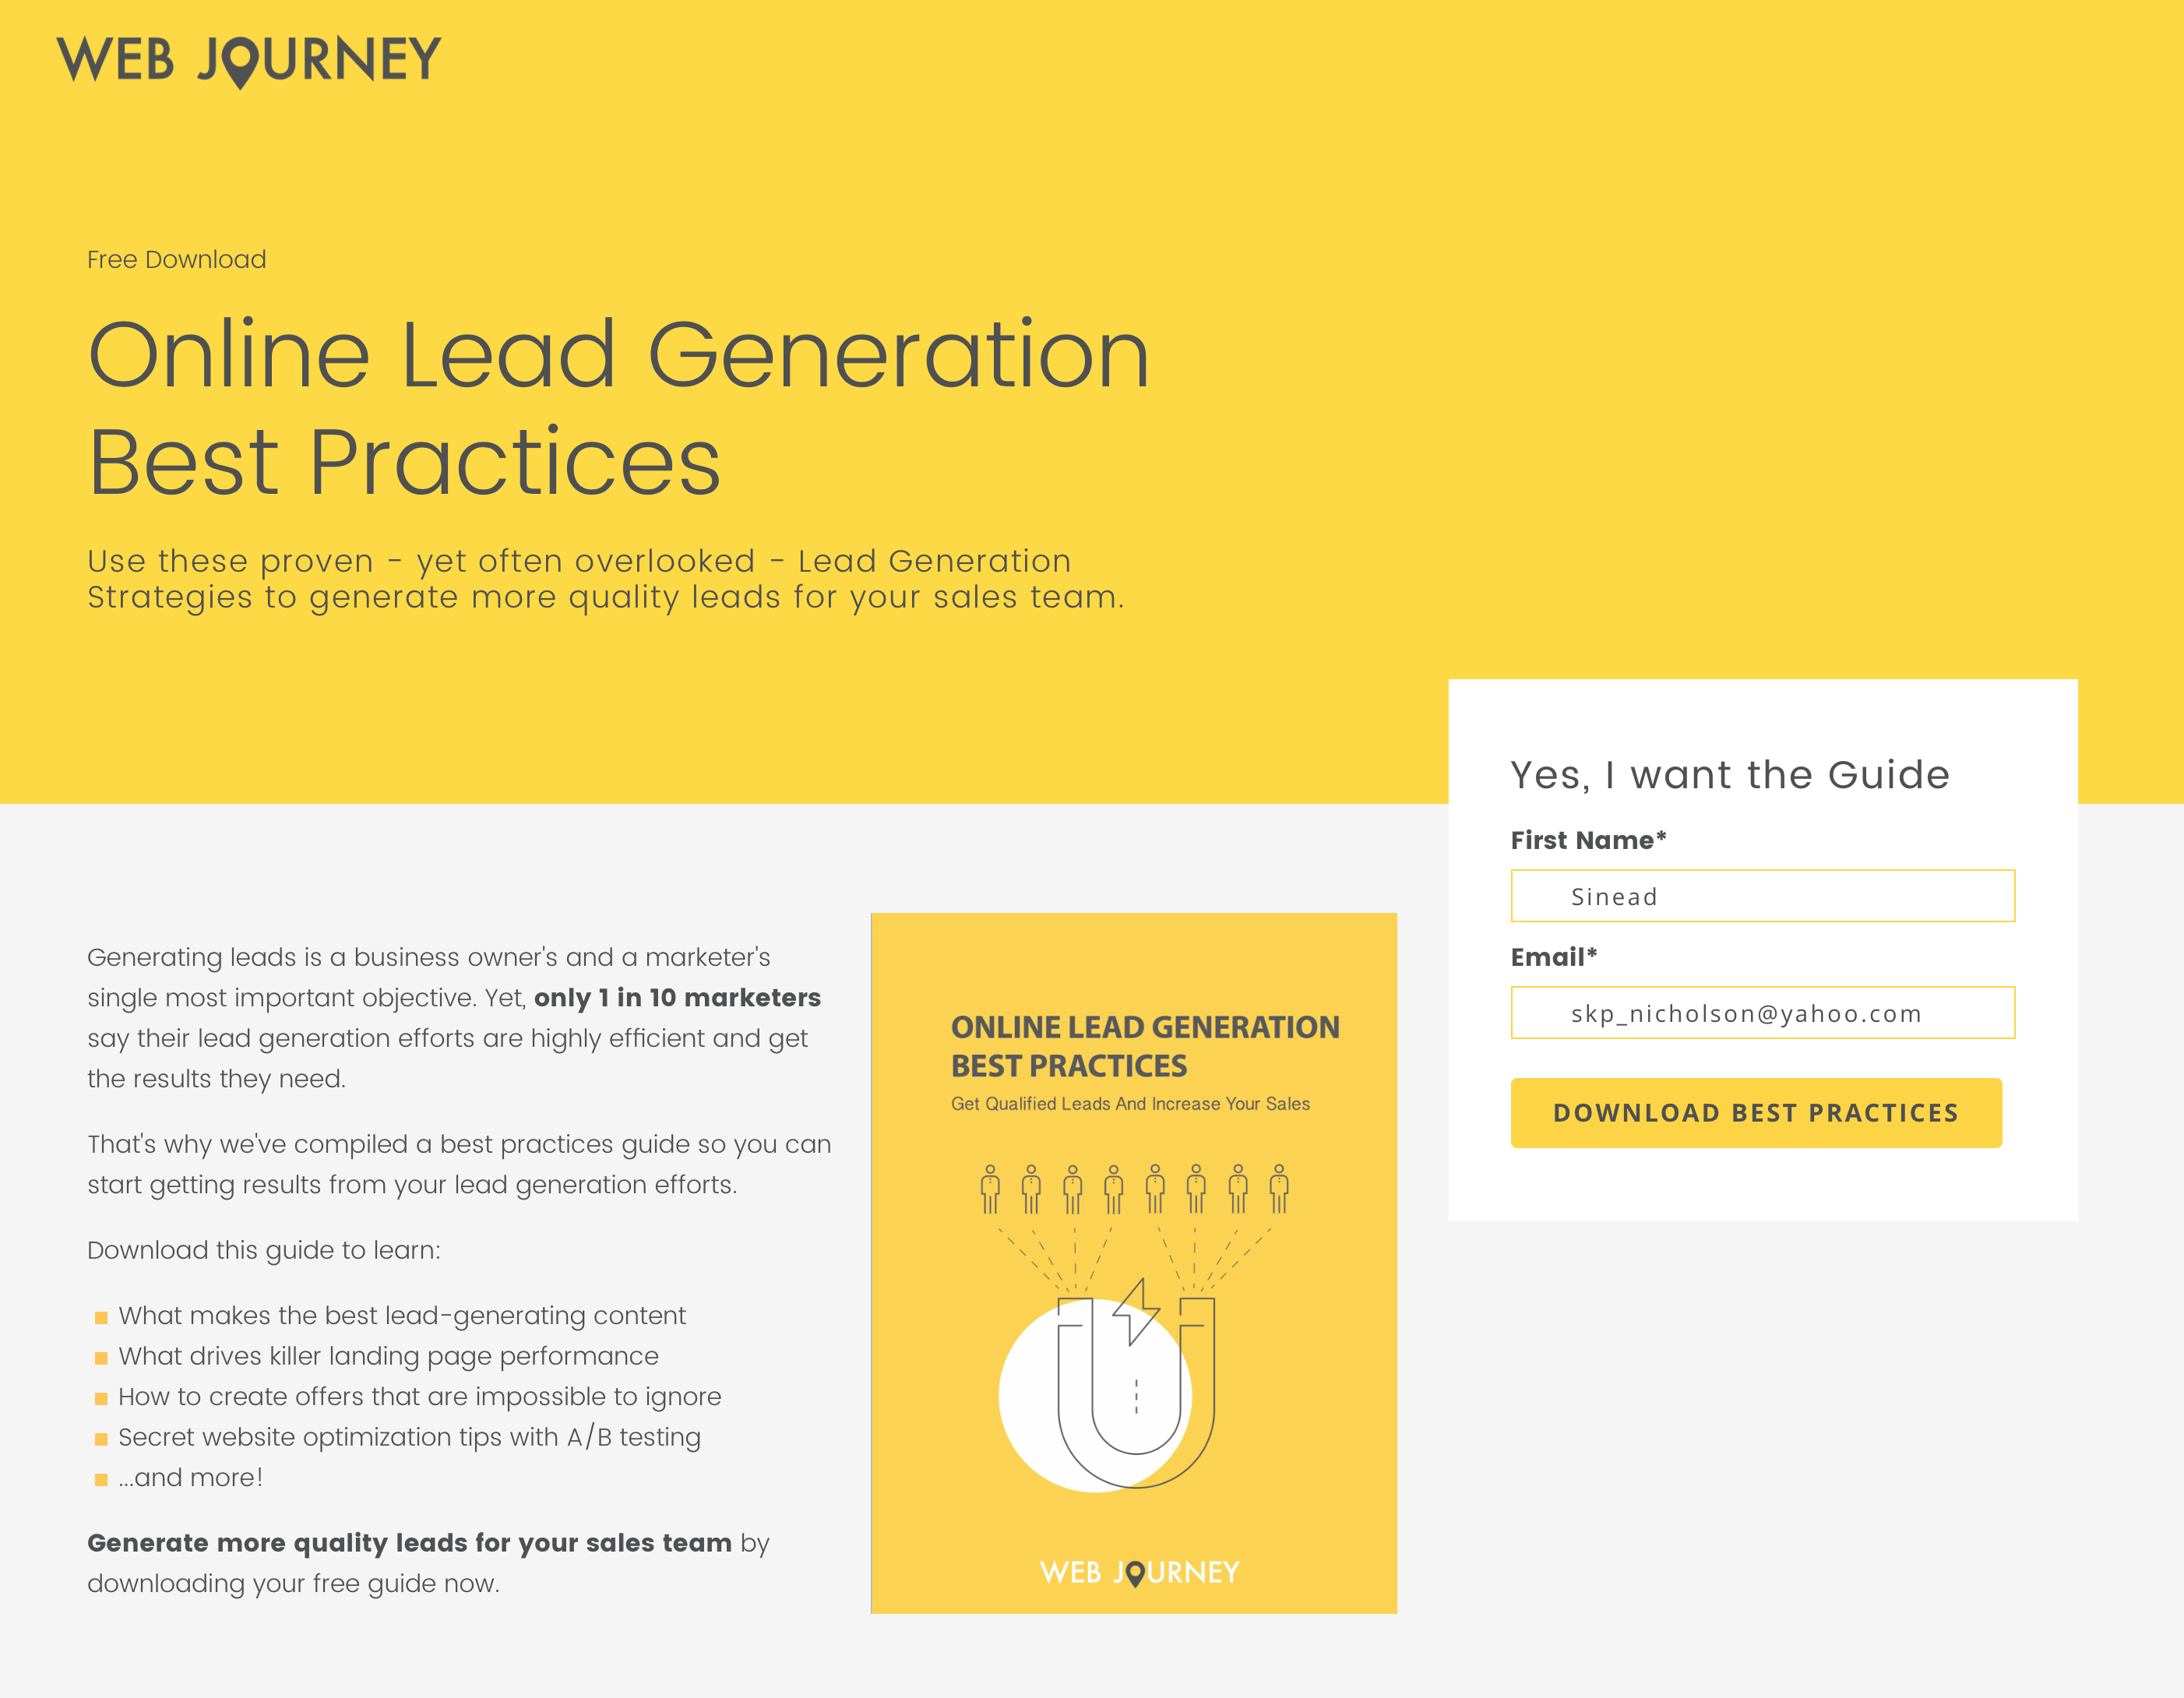 Guide To Running An Inbound Marketing Campaign - Inbound Landing Page Example